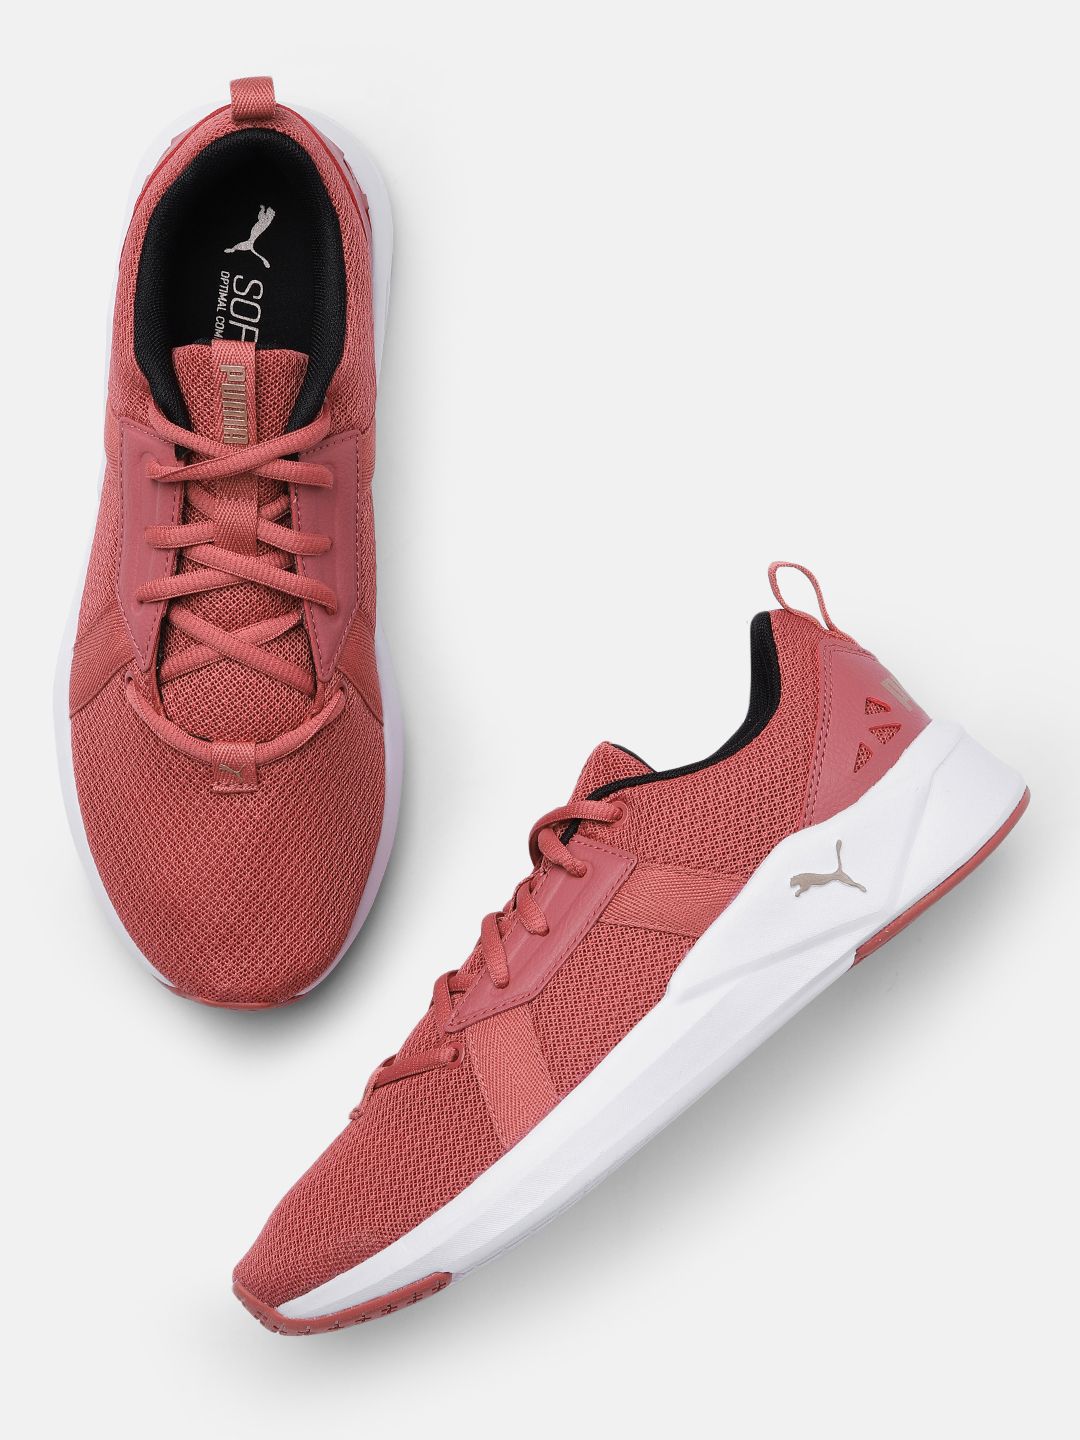 Puma Women Coral Pink Chroma Training Shoes Price in India